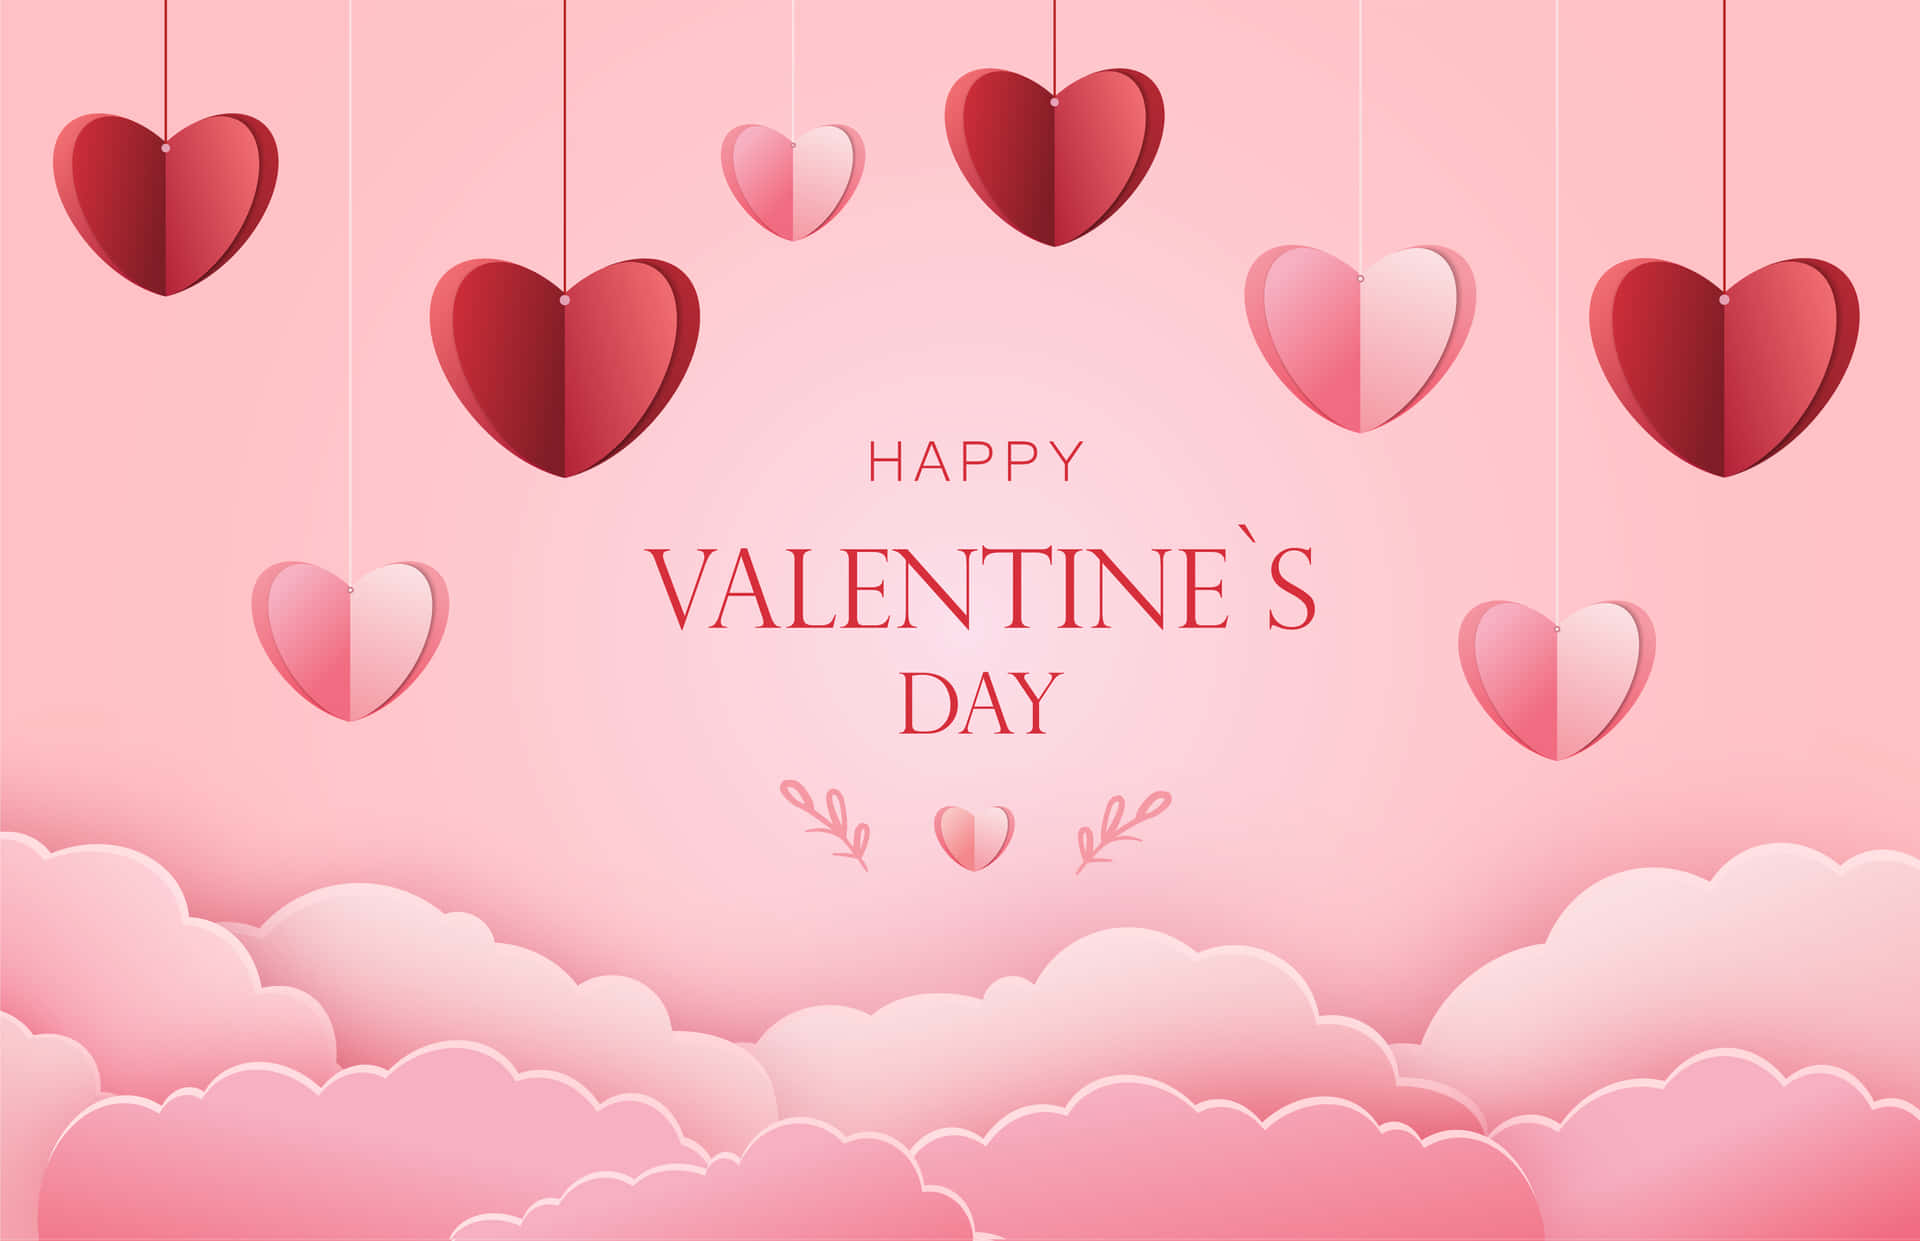 Celebrate love with this vibrant Happy Valentines Day background